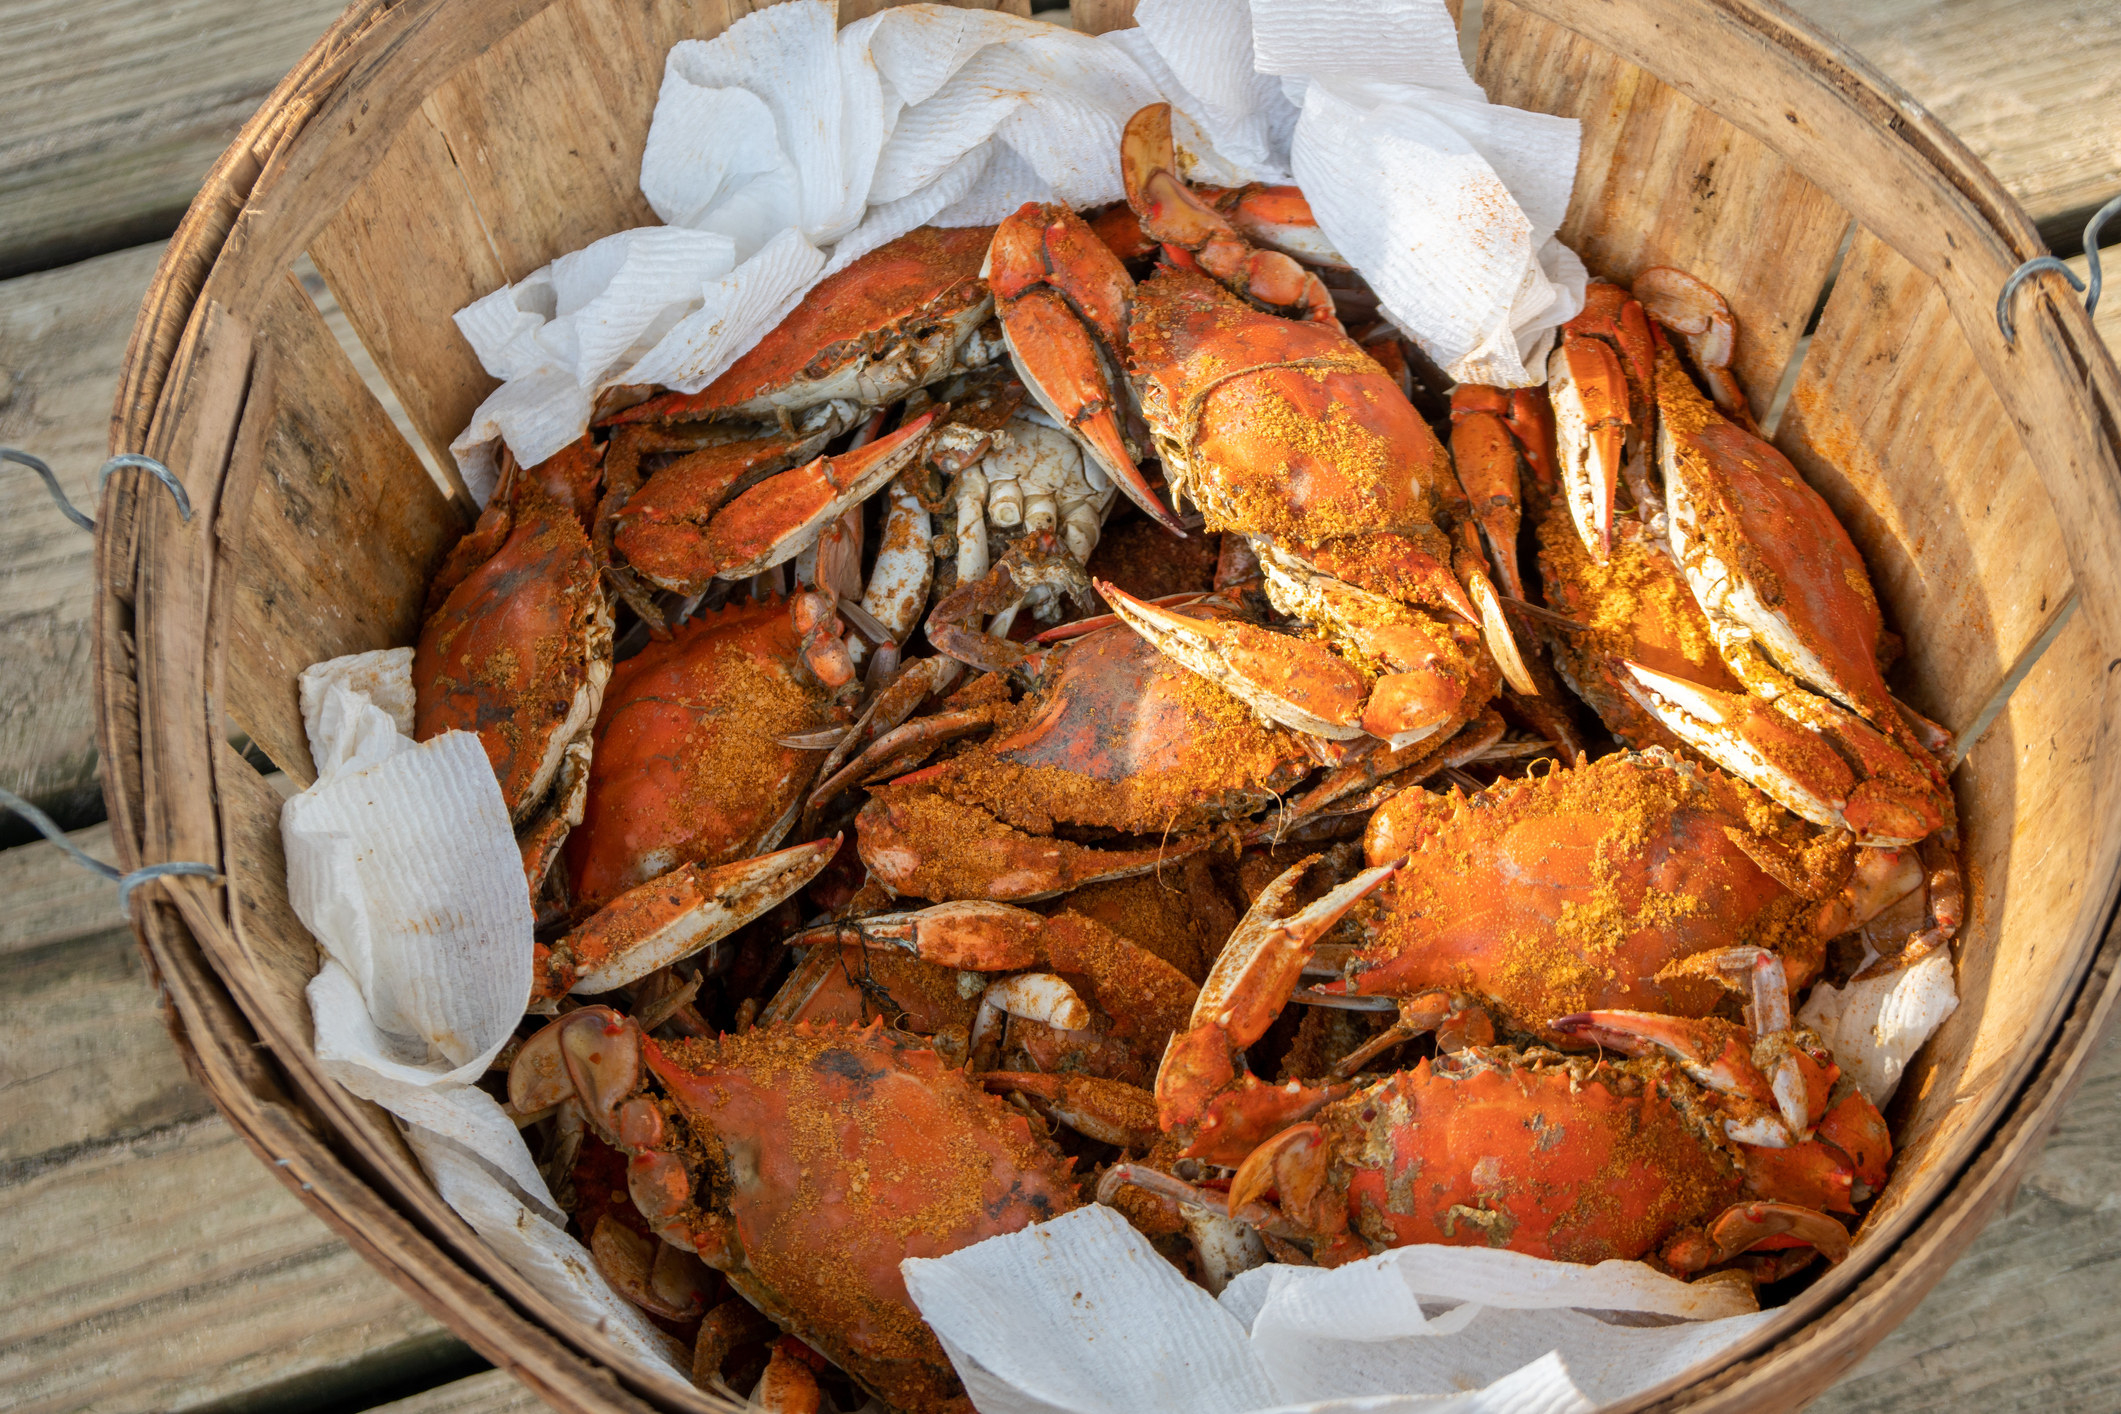 A bucket of boiled blue crabs.